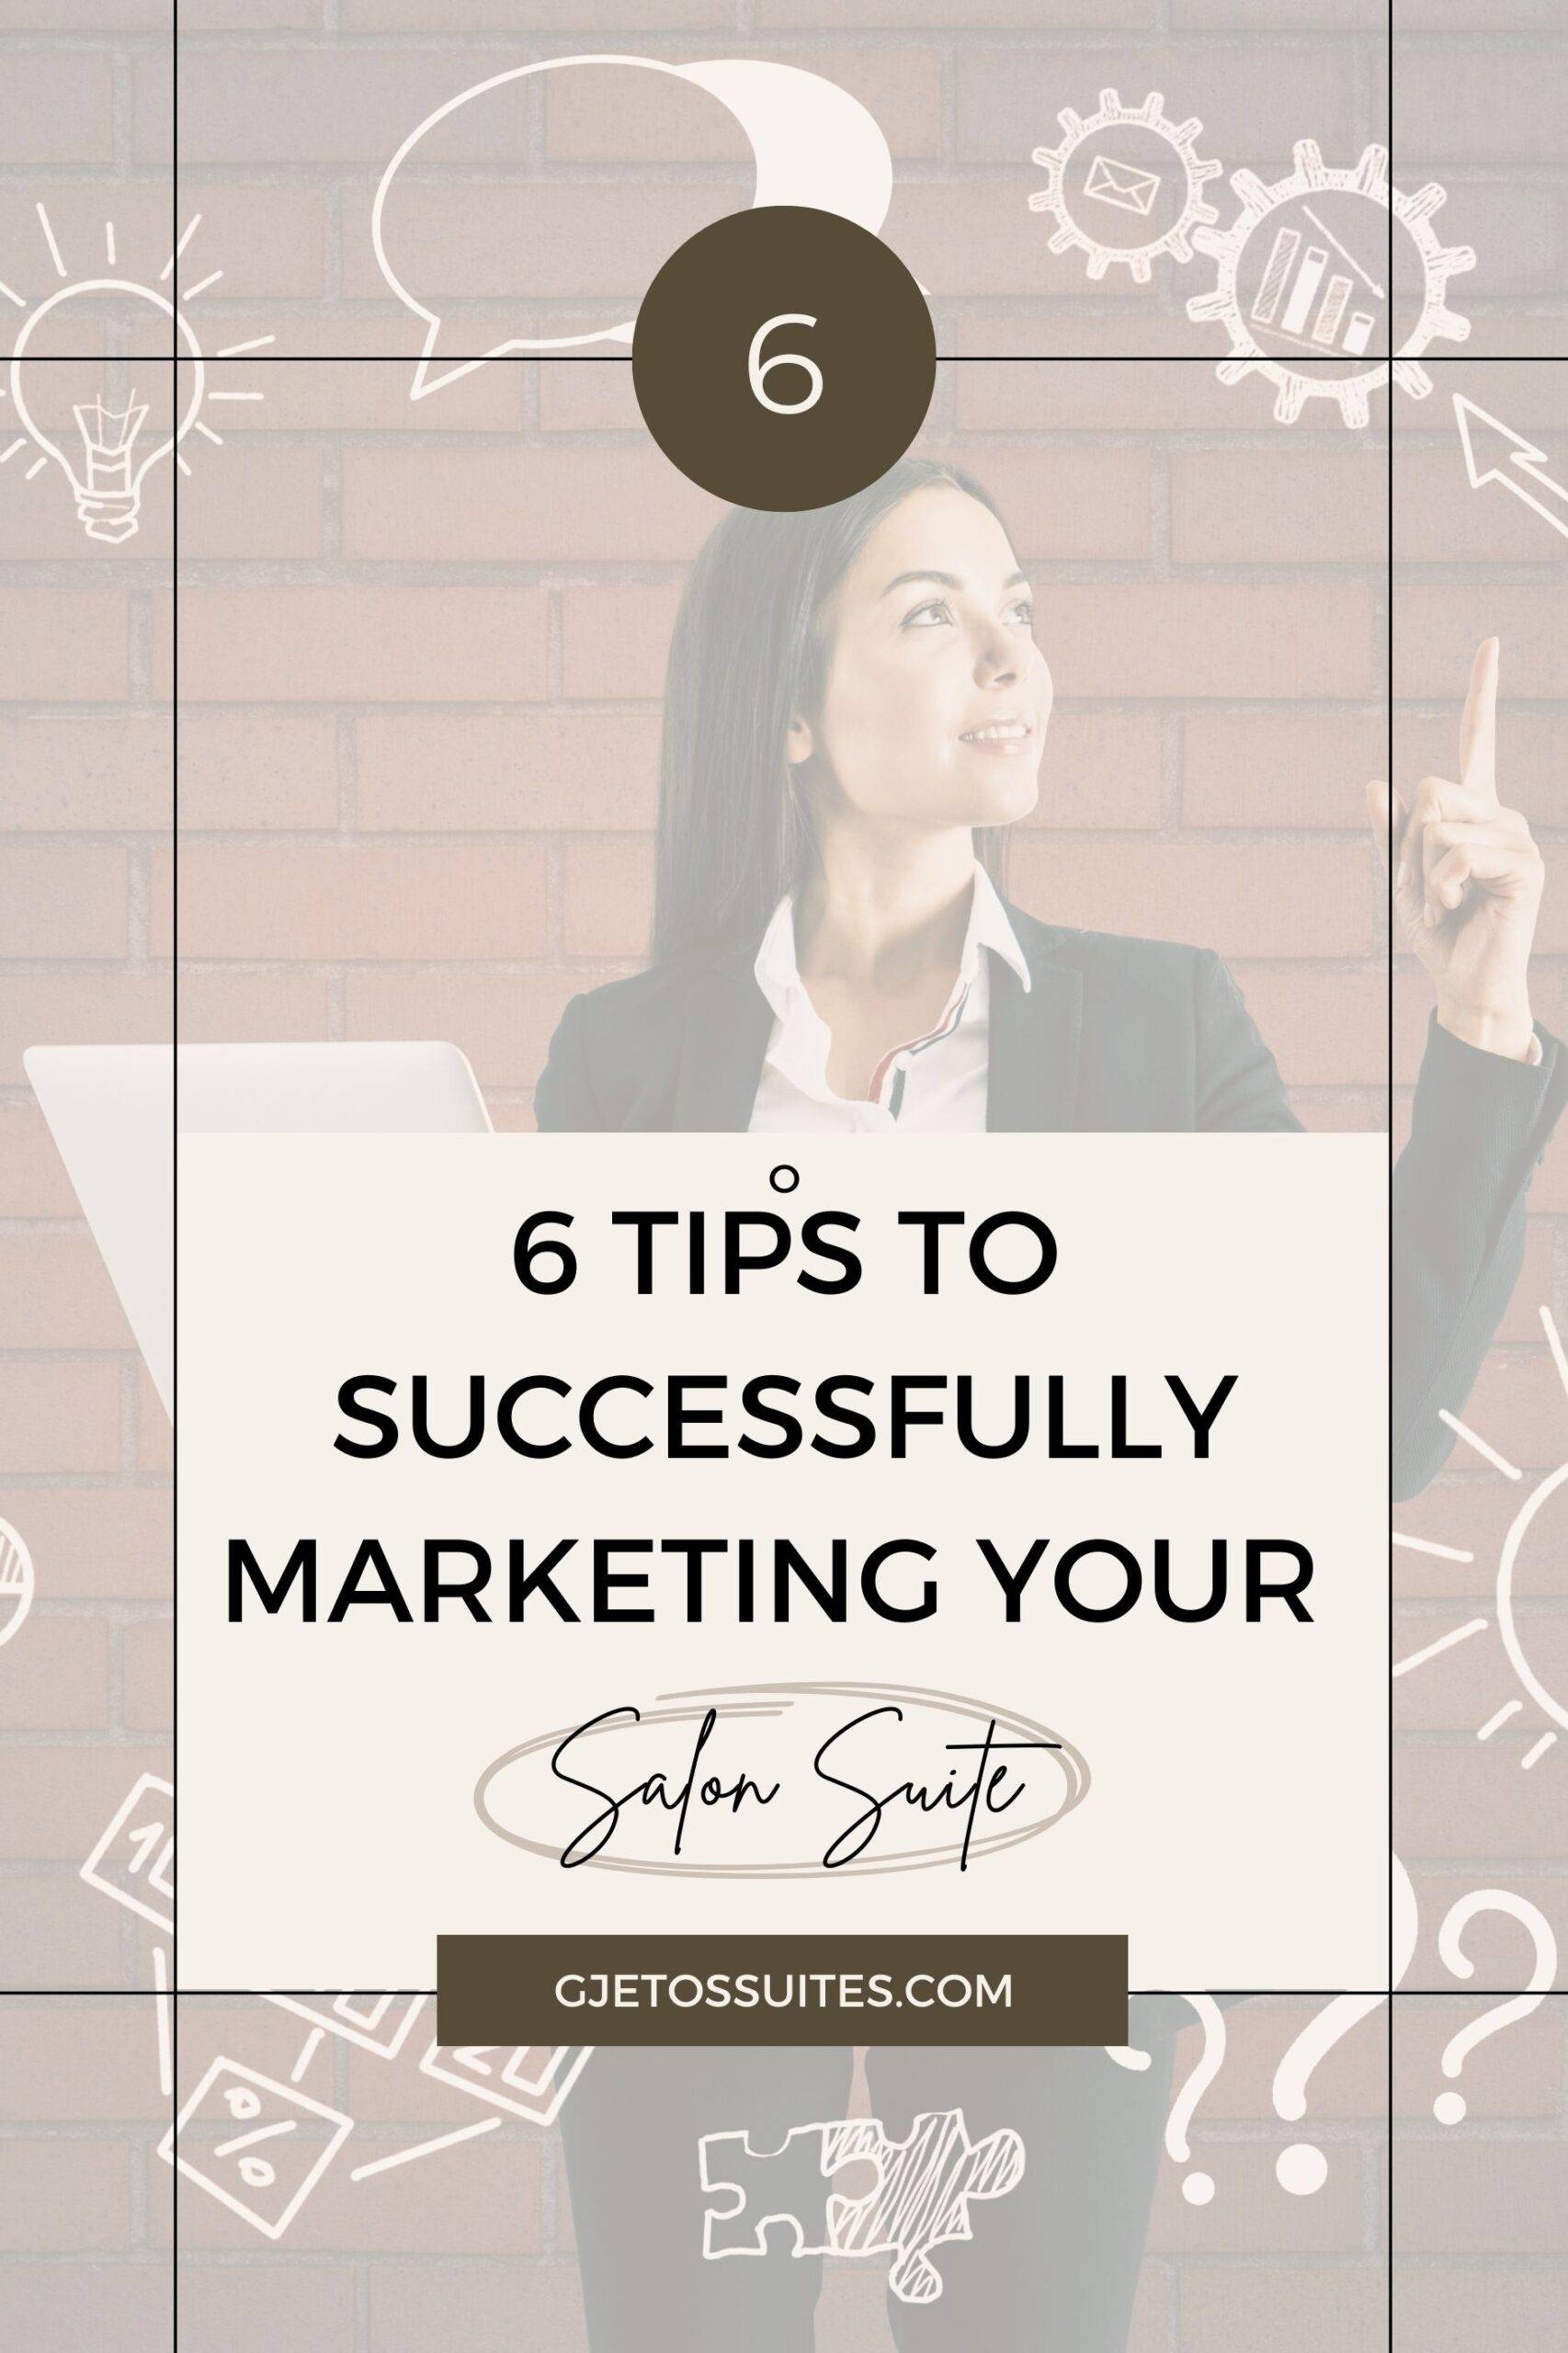 6 Tips to Successfully Marketing your Salon Suite